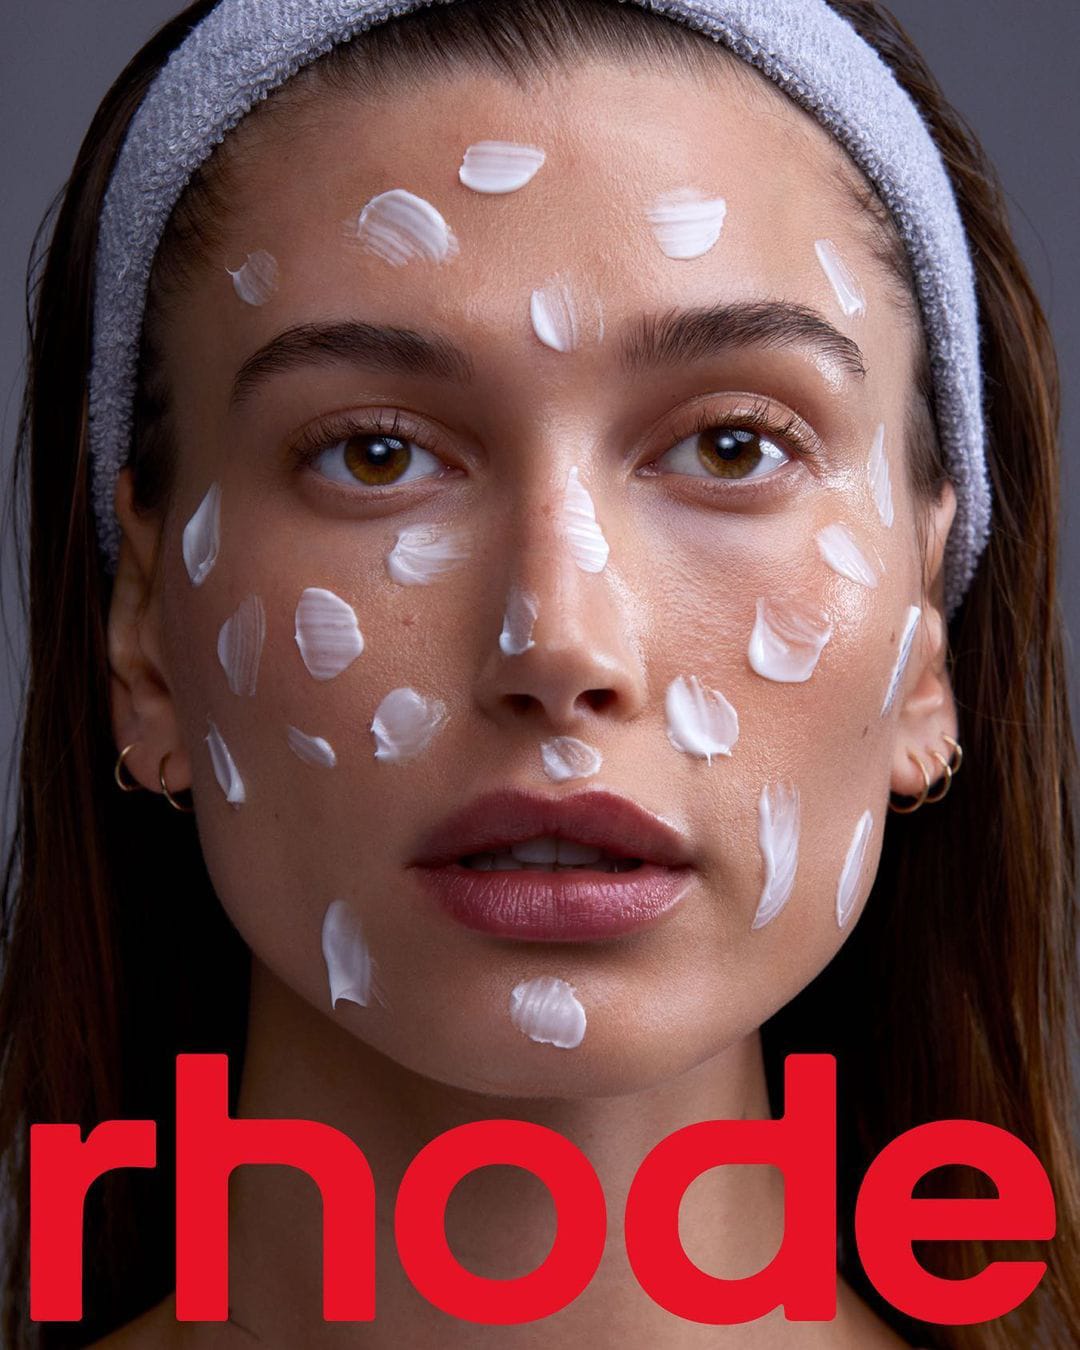 Hailey Bieber launches the Rhode beauty brand on June 15, 2022